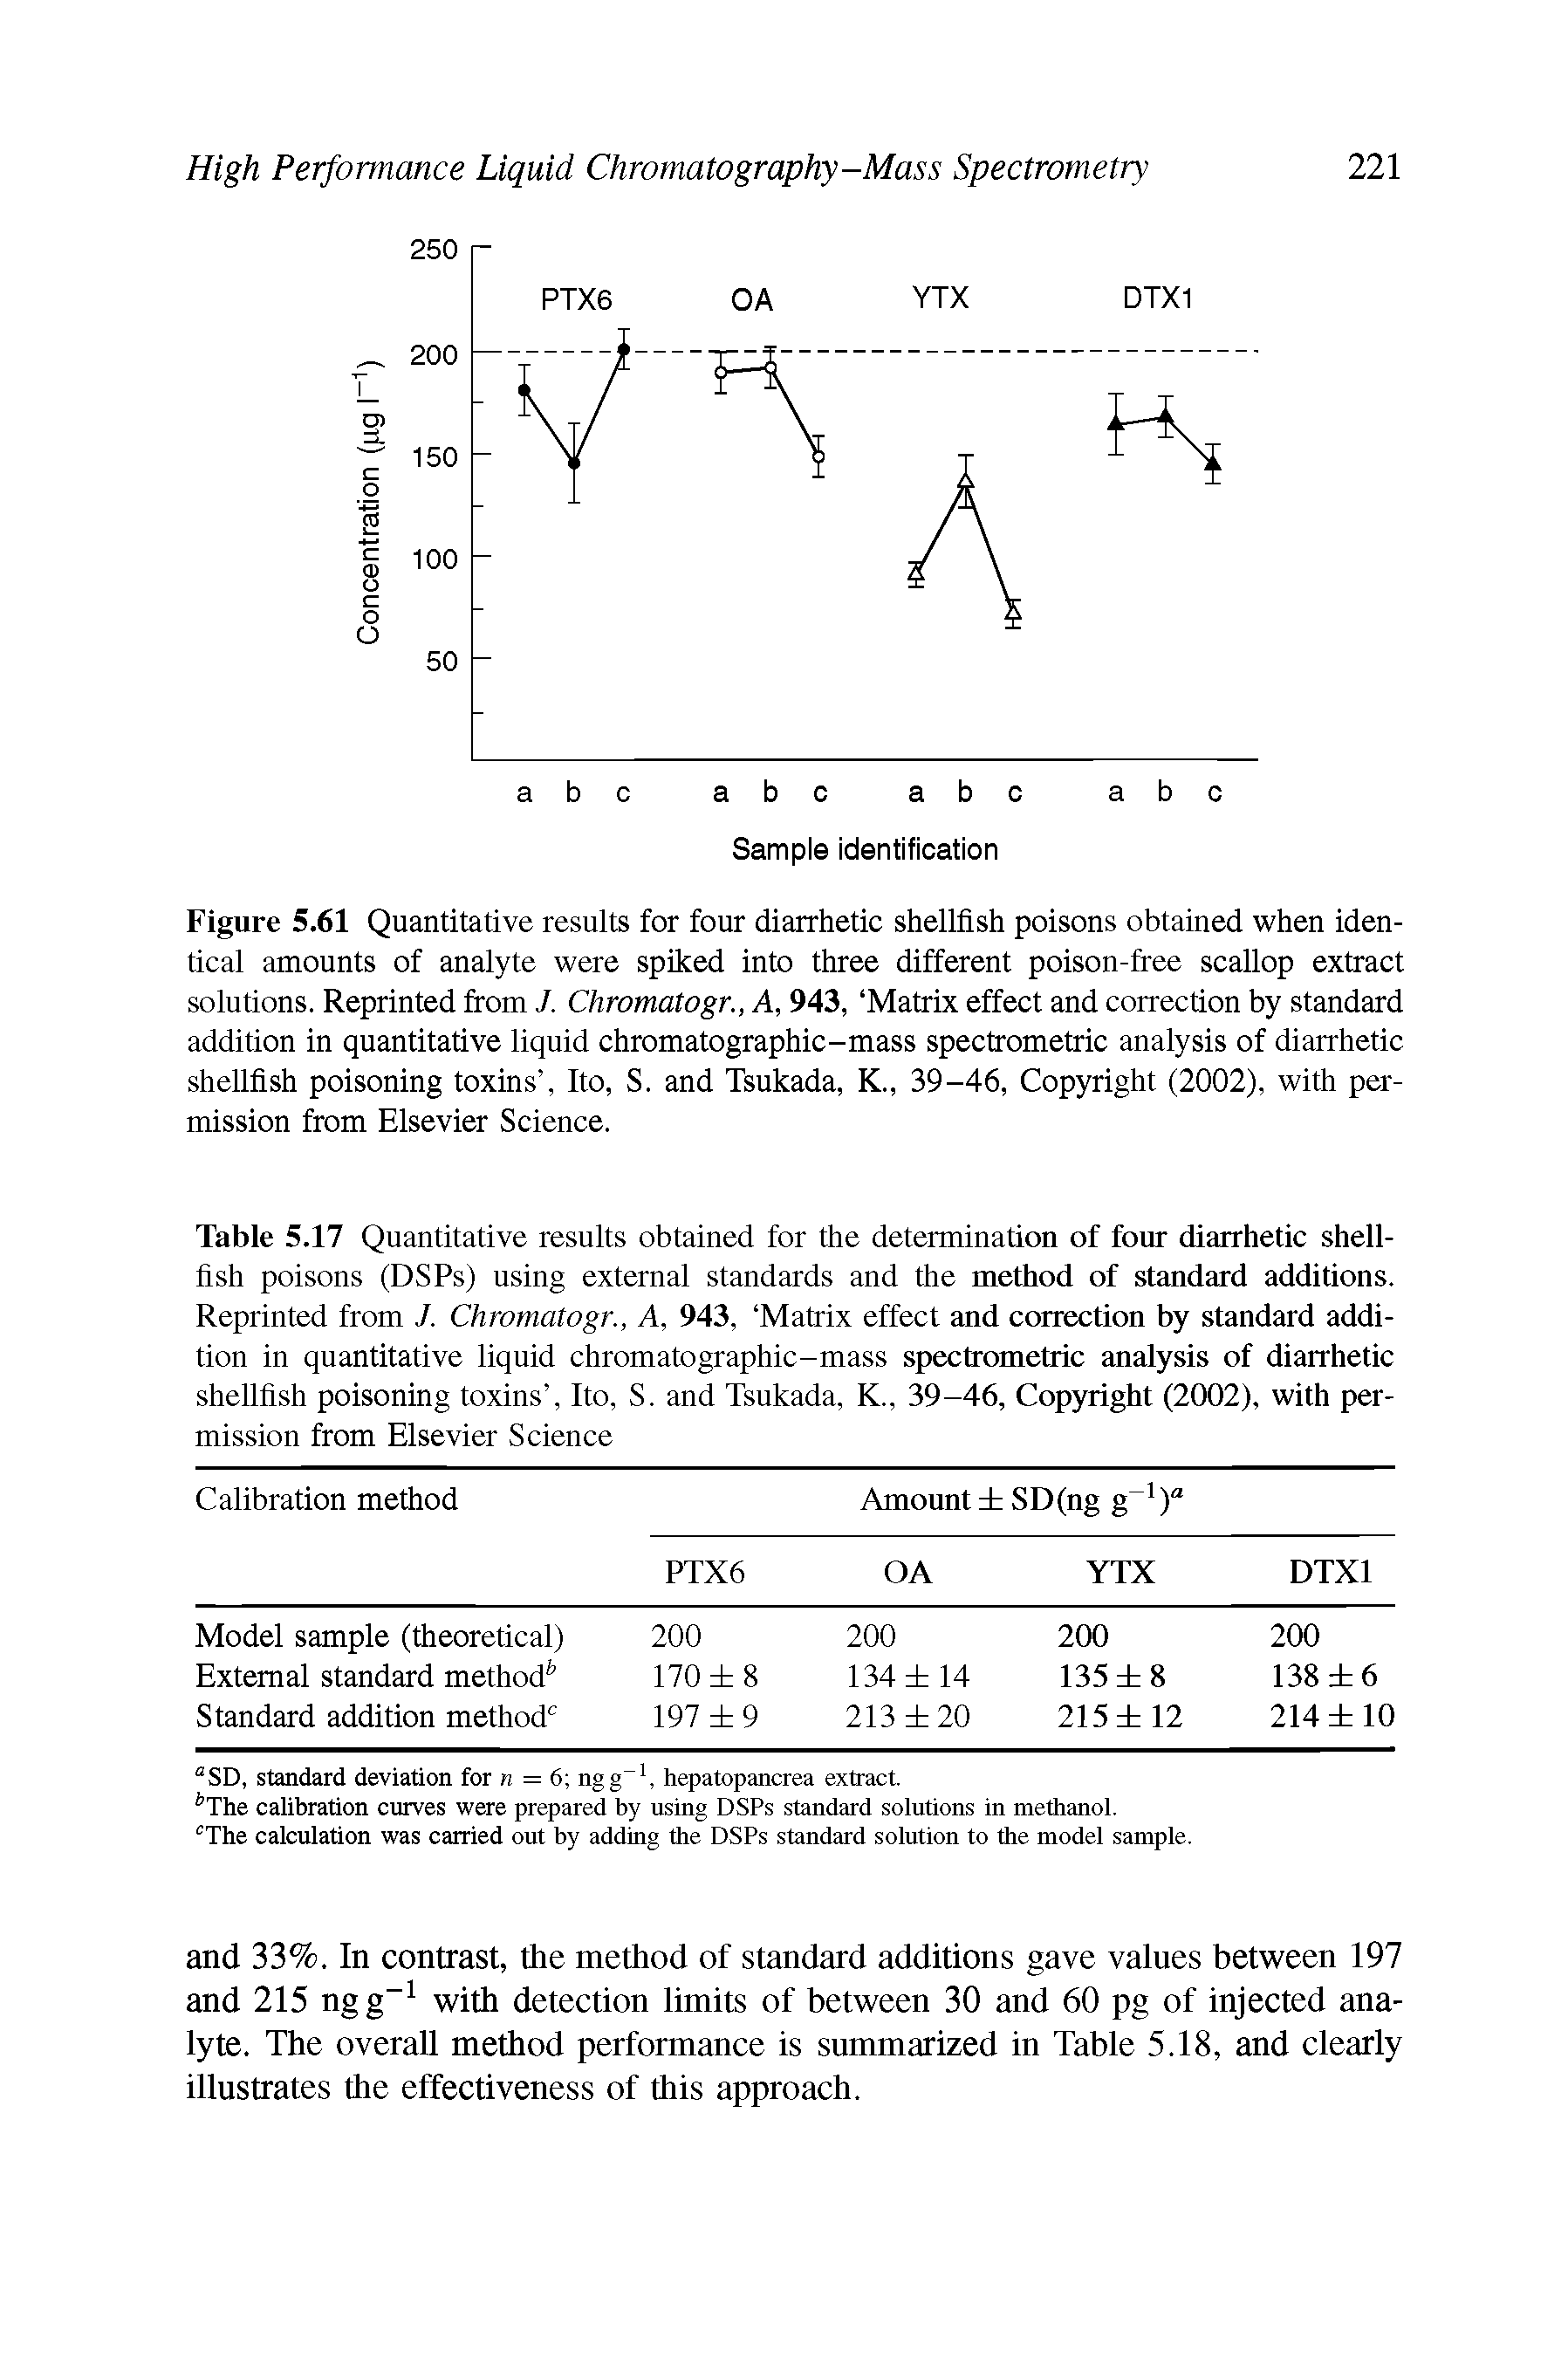 Table 5.17 Quantitative results obtained for the determination of four diarrhetic shellfish poisons (DSPs) using external standards and the method of standard additions. Reprinted from J. Chromatogr., A, 943, Matrix effect and correction by standard addition in quantitative liquid chromatographic-mass spectrometric analysis of diarrhetic shellfish poisoning toxins , Ito, S. and Tsukada, K., 39-46, Copyright (2002), with permission from Elsevier Science...